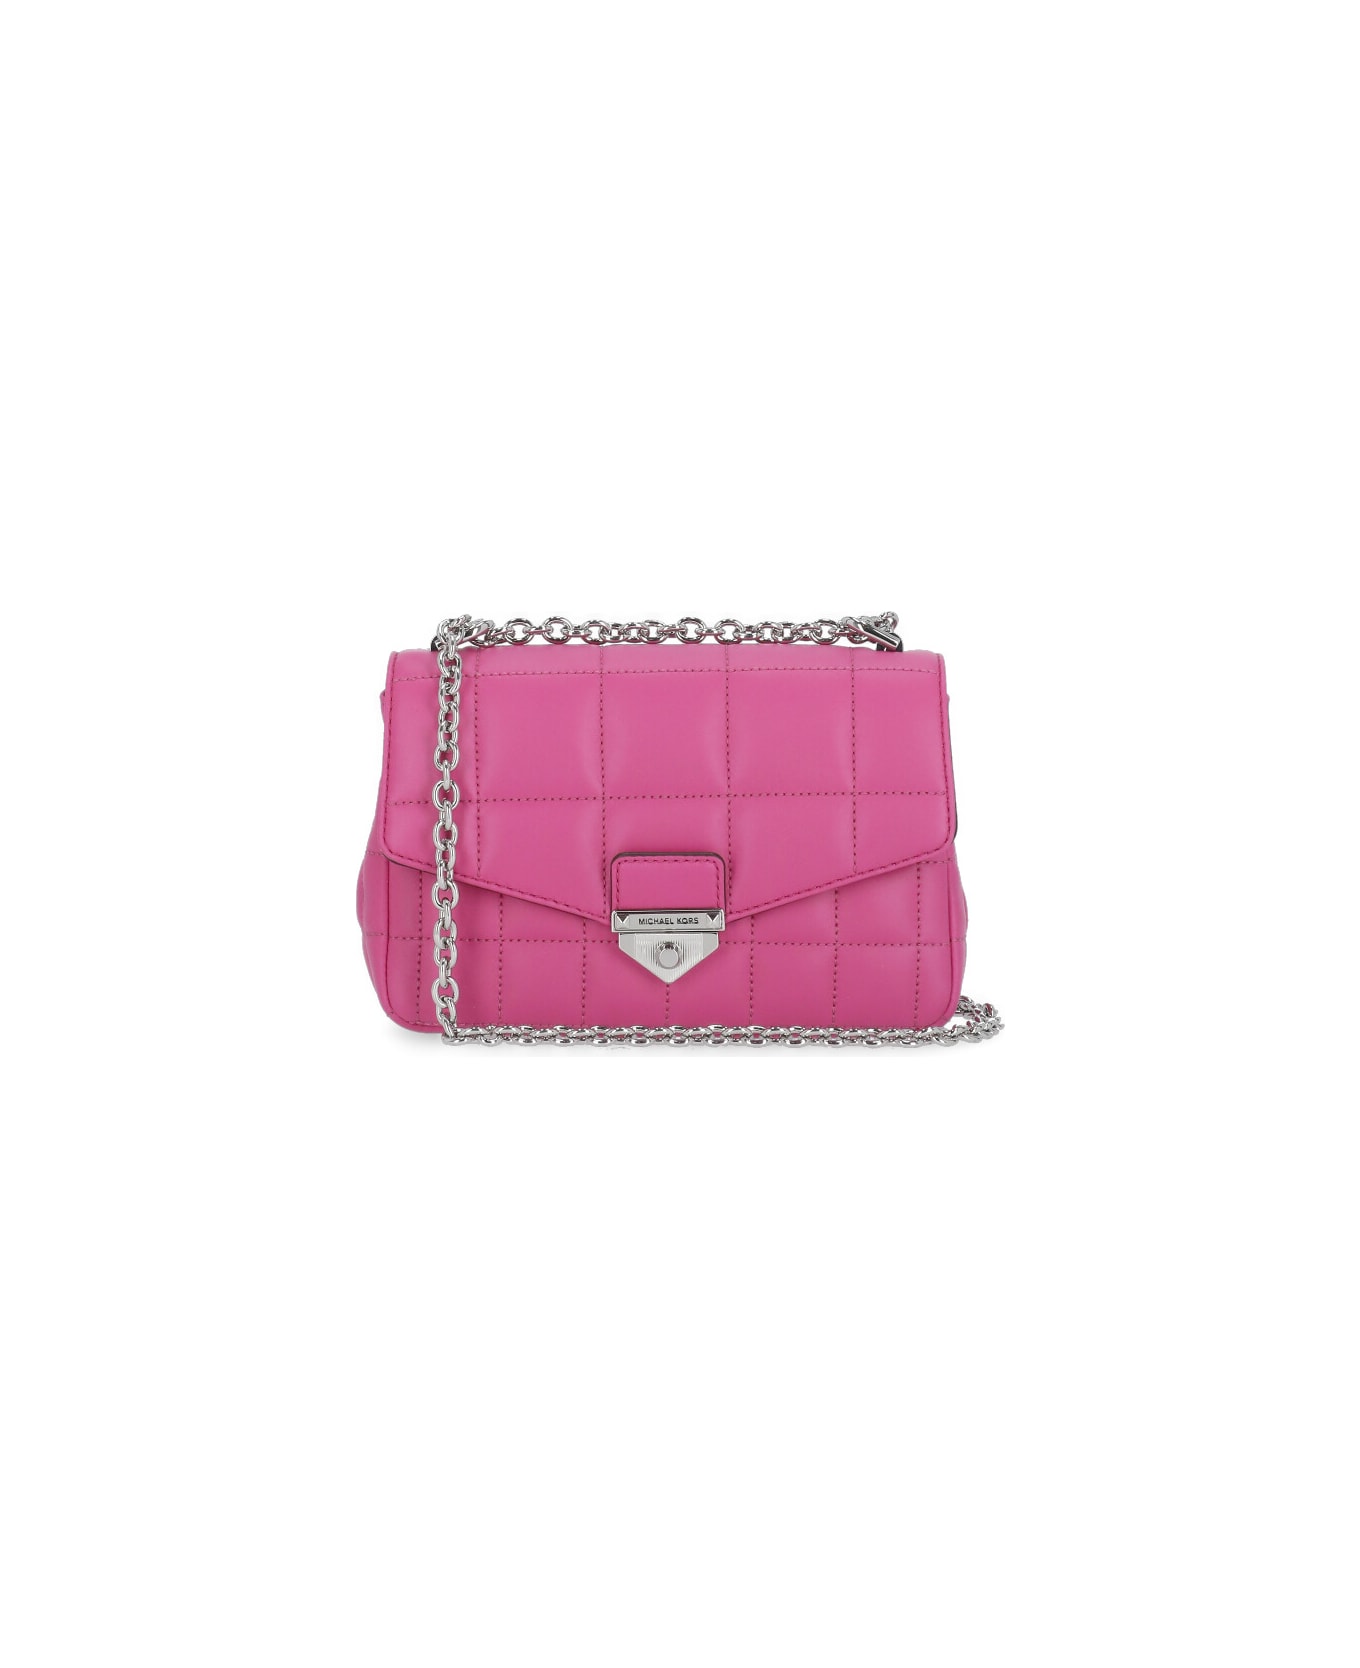 Michael Kors Soho Quilted Leather Shoulder Bag - Fuchsia